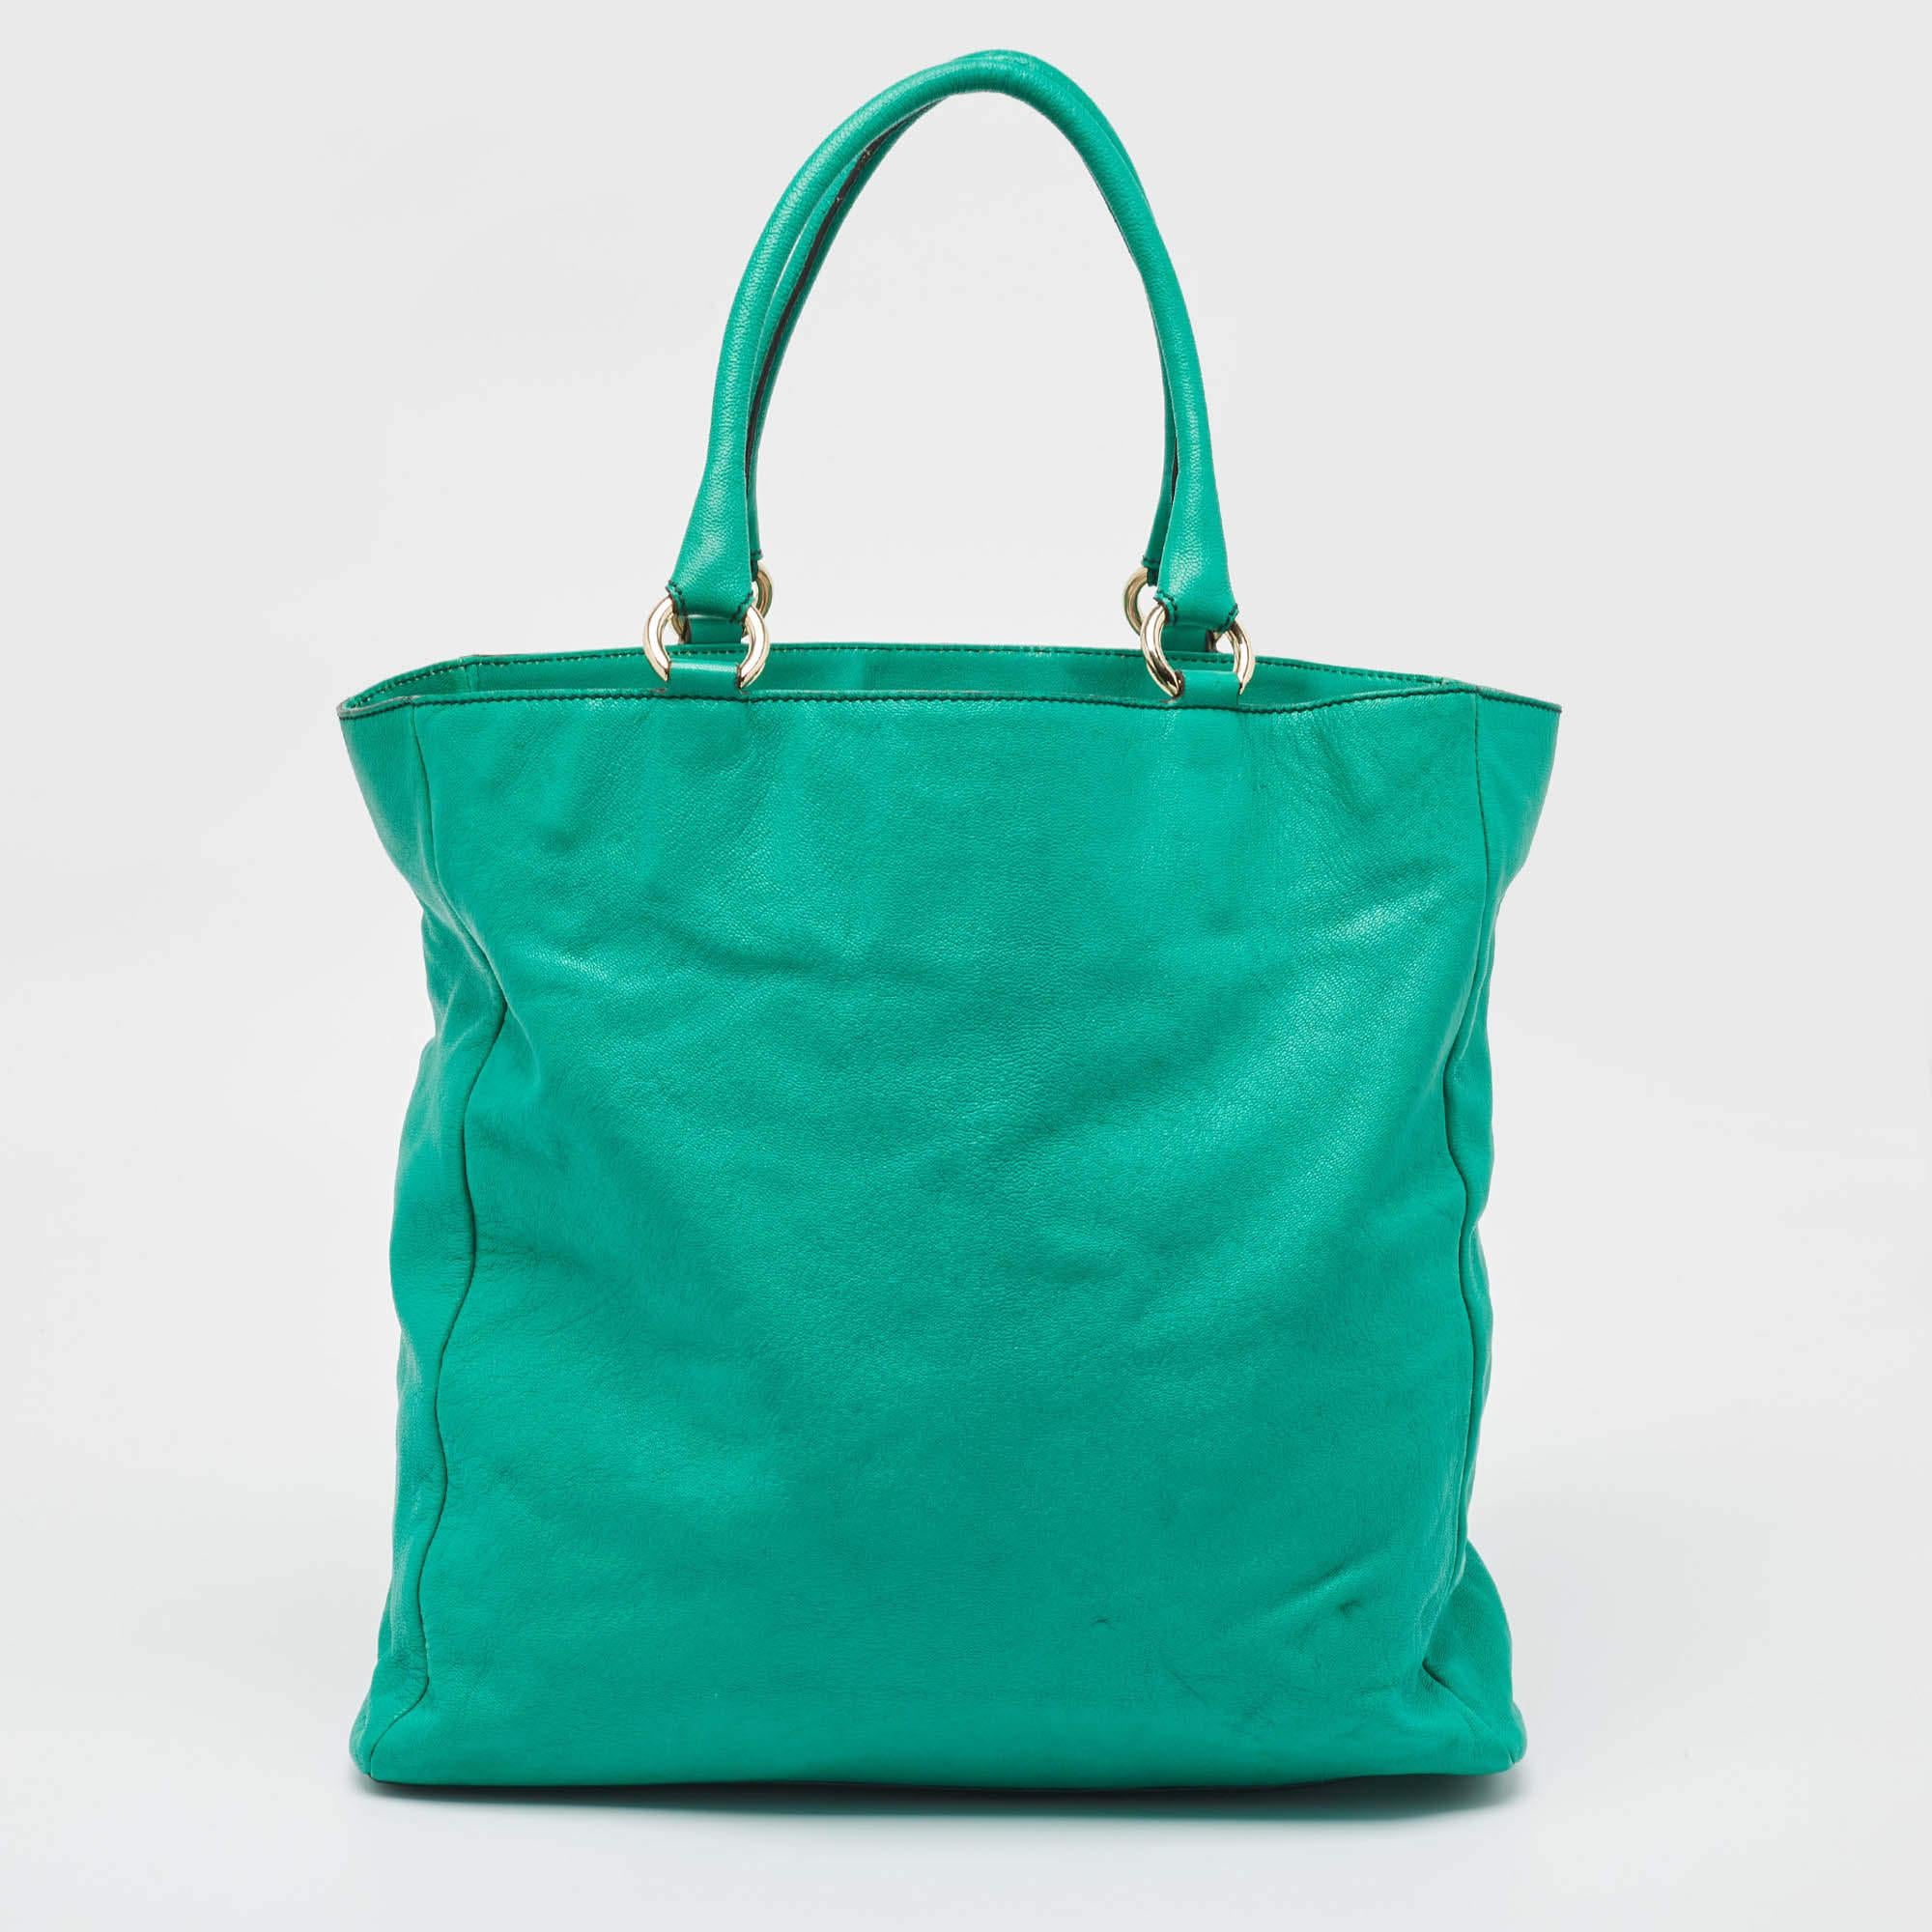 The architectural shape of this tote makes it distinct and fashionable. Made from premium materials, it can be carried around conveniently and it is equipped with a perfectly-sized interior.

